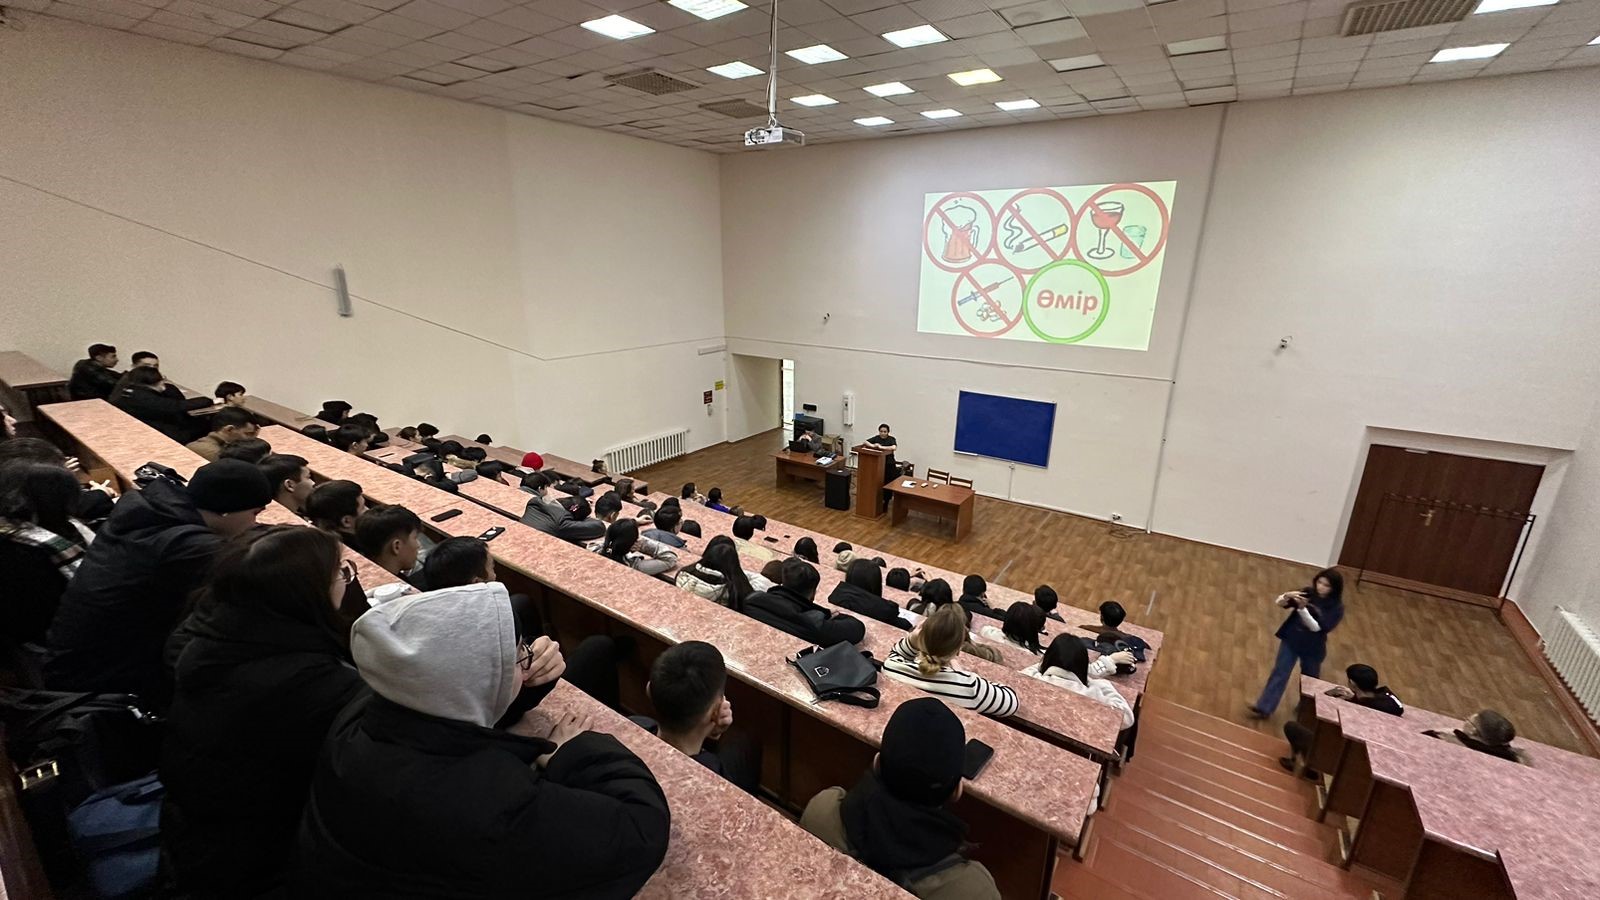 Lecture for students on the topic “The harm of drugs, drug addiction and unhealthy lifestyle”